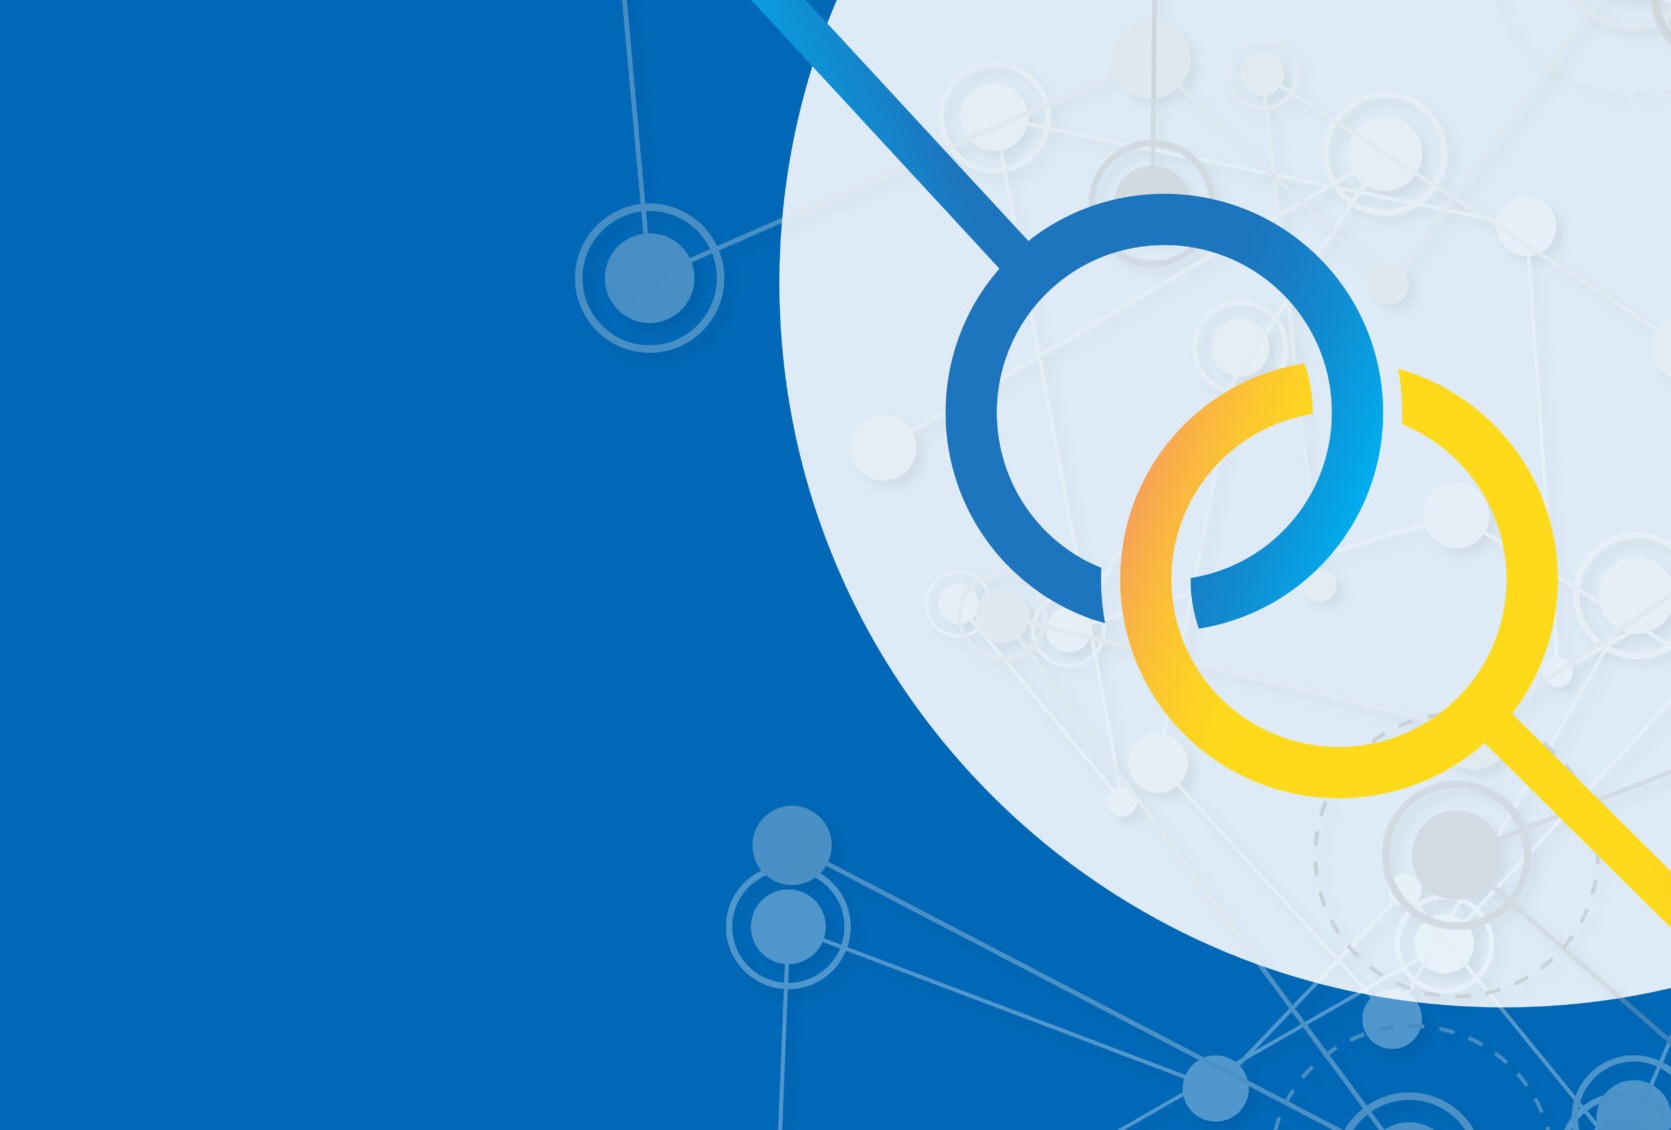 Cancer data strategy logo of blue and yellow linked circles.